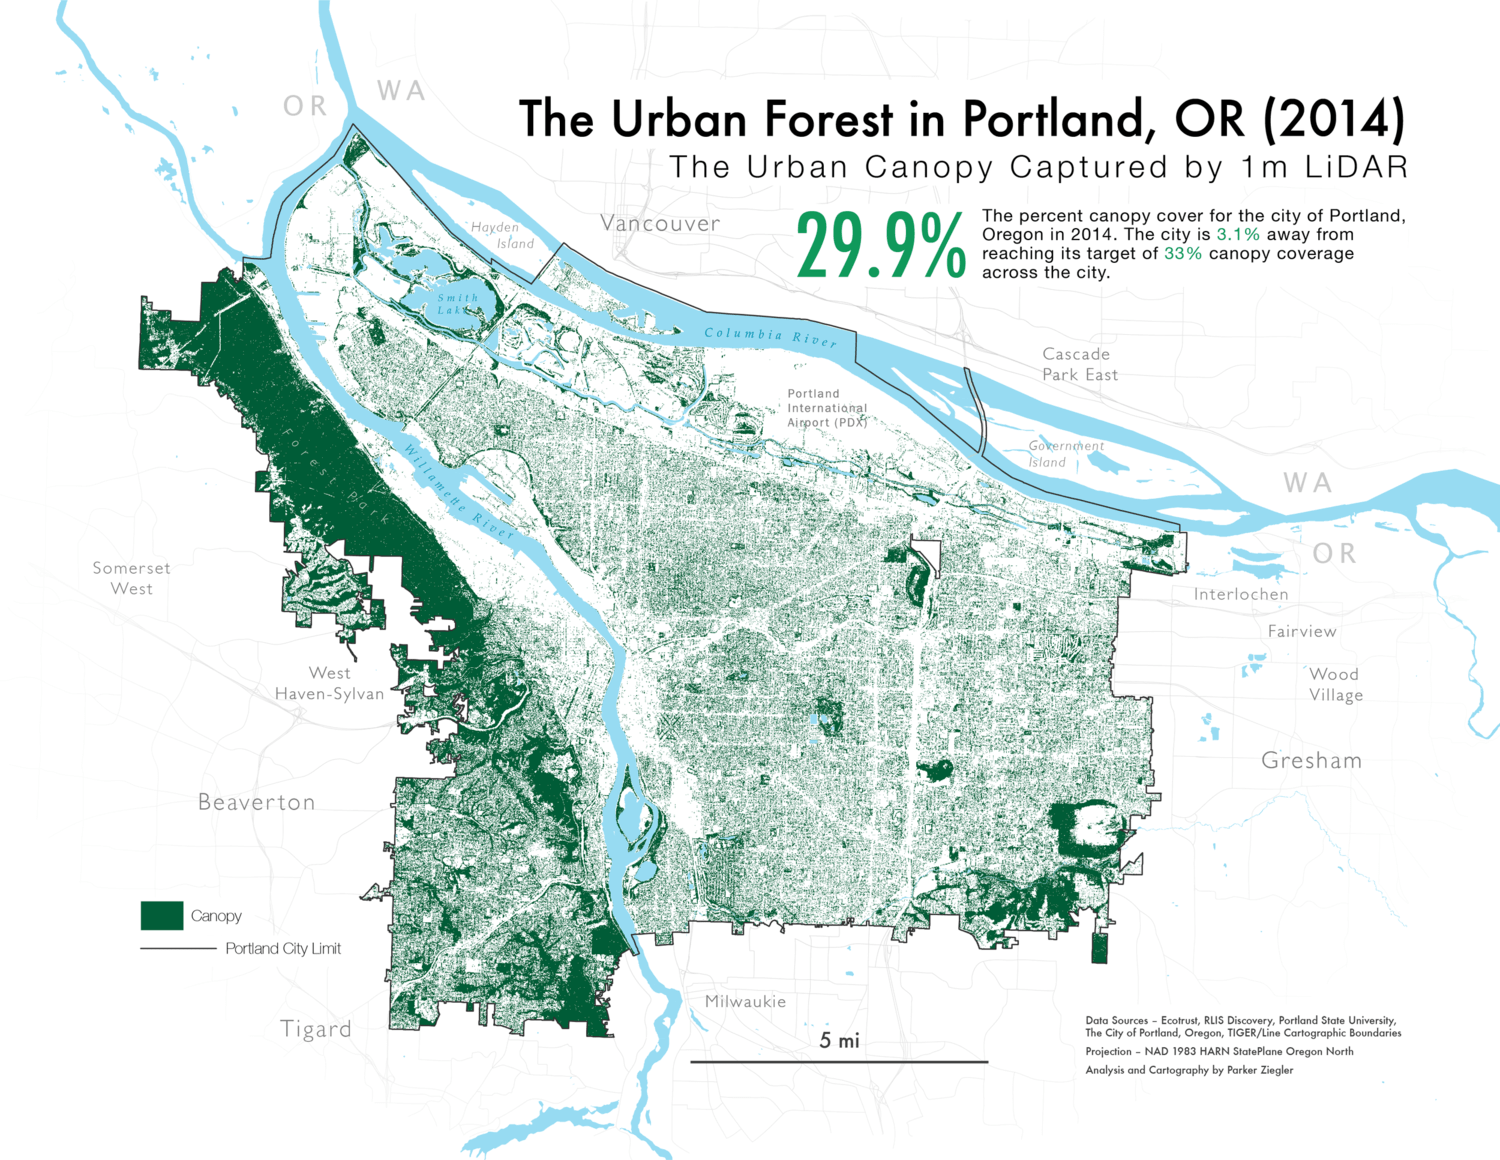 A map of Portland's urban canopy captured using LiDAR in 2014.